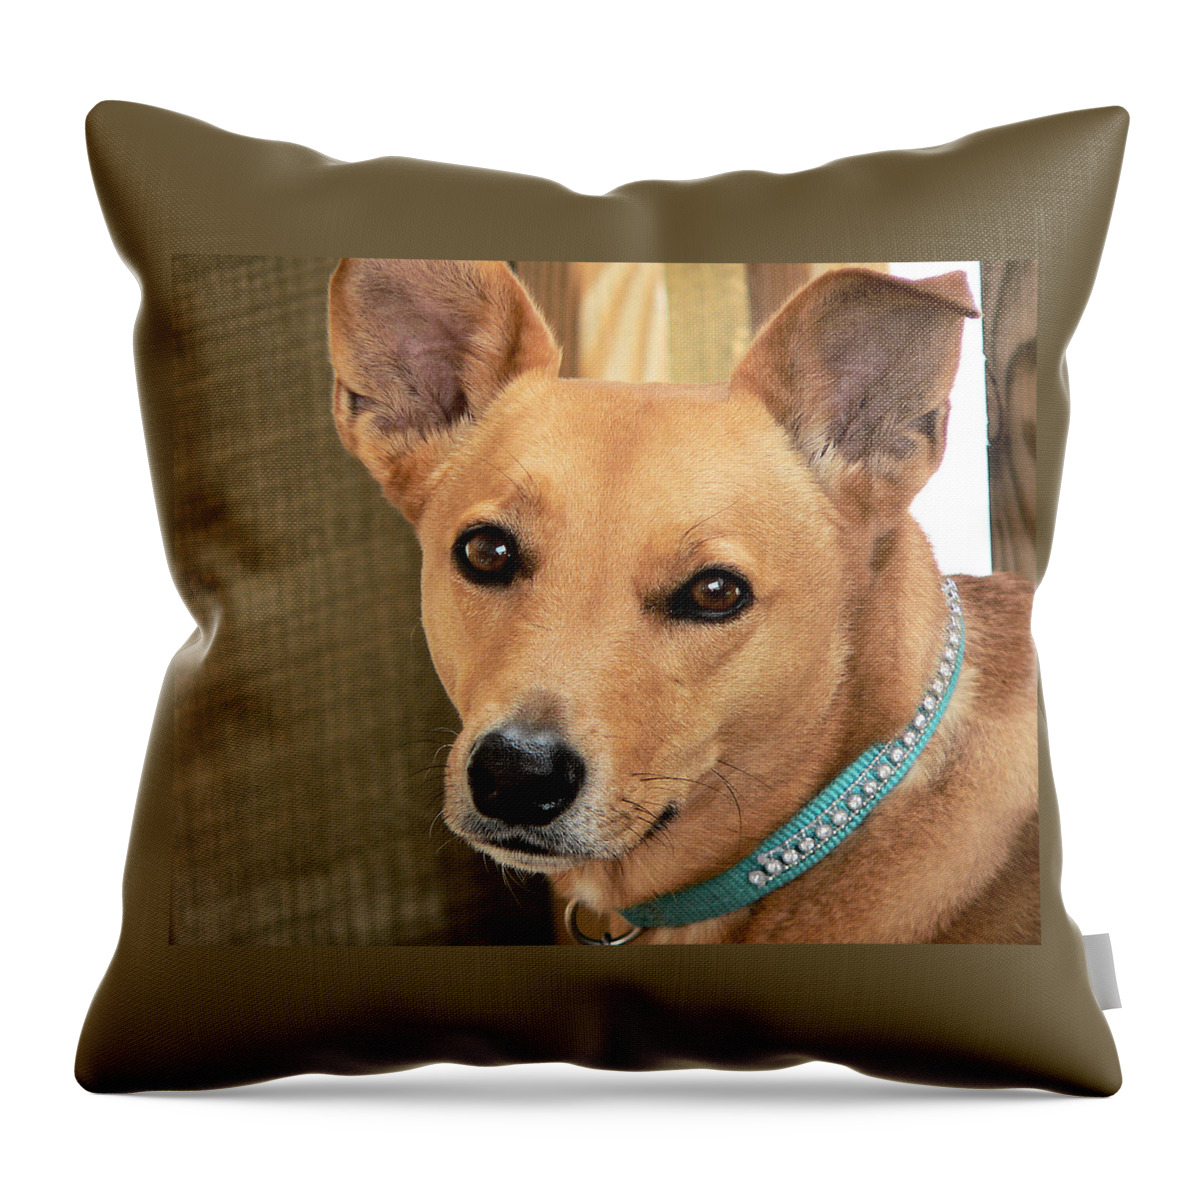 Dog-cookie One Throw Pillow featuring the photograph Dog - Cookie One by Kathy K McClellan